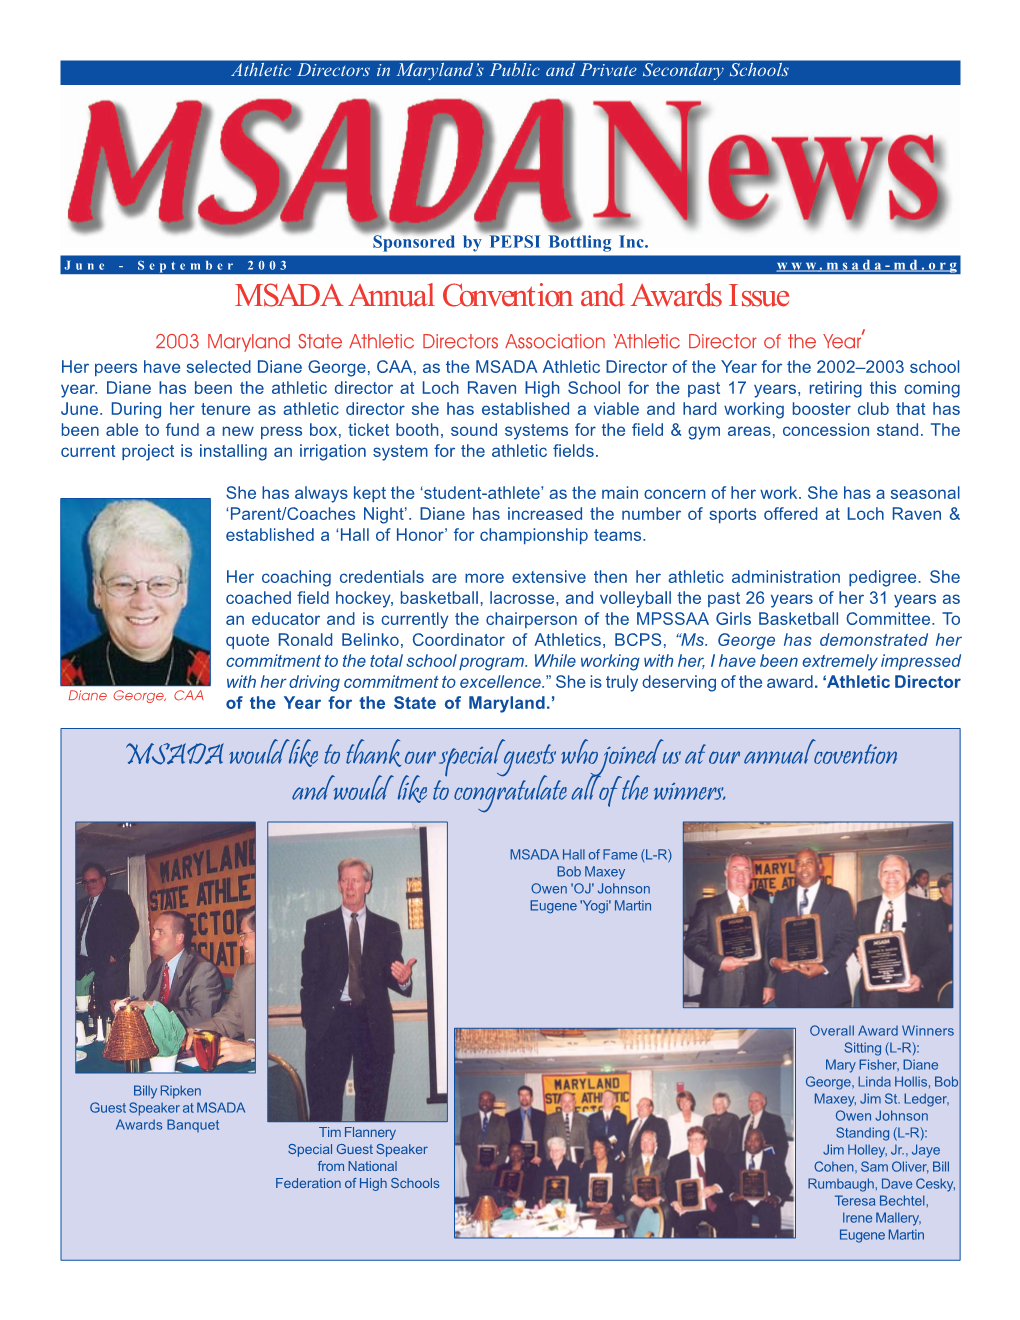 MSADA Annual Convention and Awards Issue